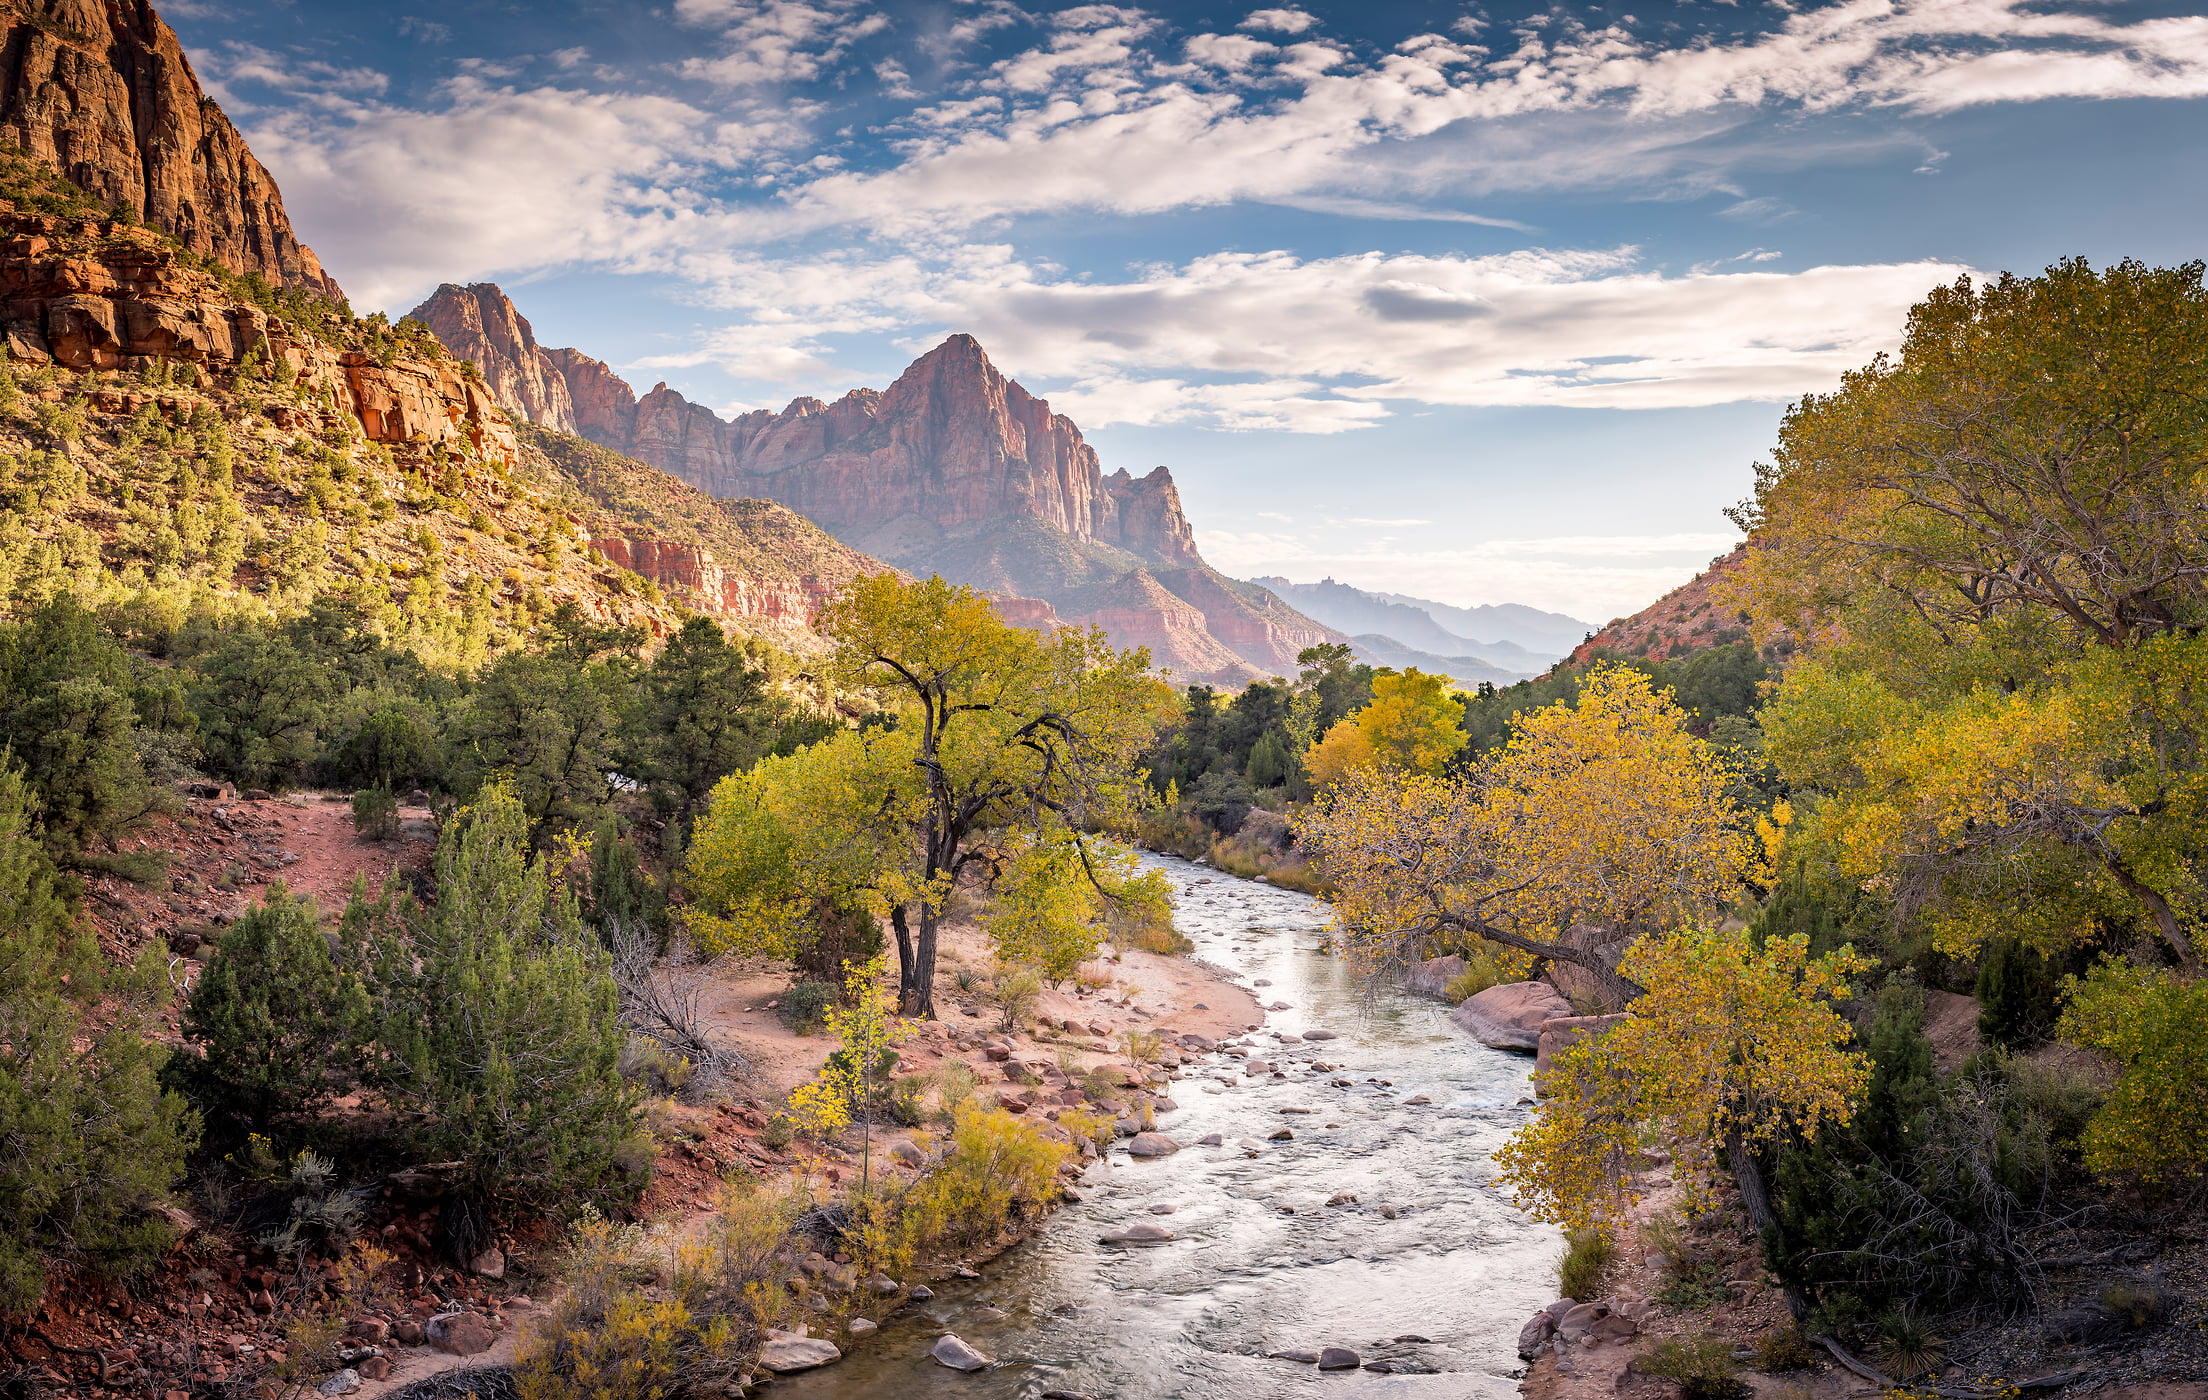 302 megapixels! A very high resolution, large-format VAST photo print of a beautiful American landscape scene with a stream and autumn trees in Zion National Park; landscape photo of a valley in Utah created by Justin Katz.